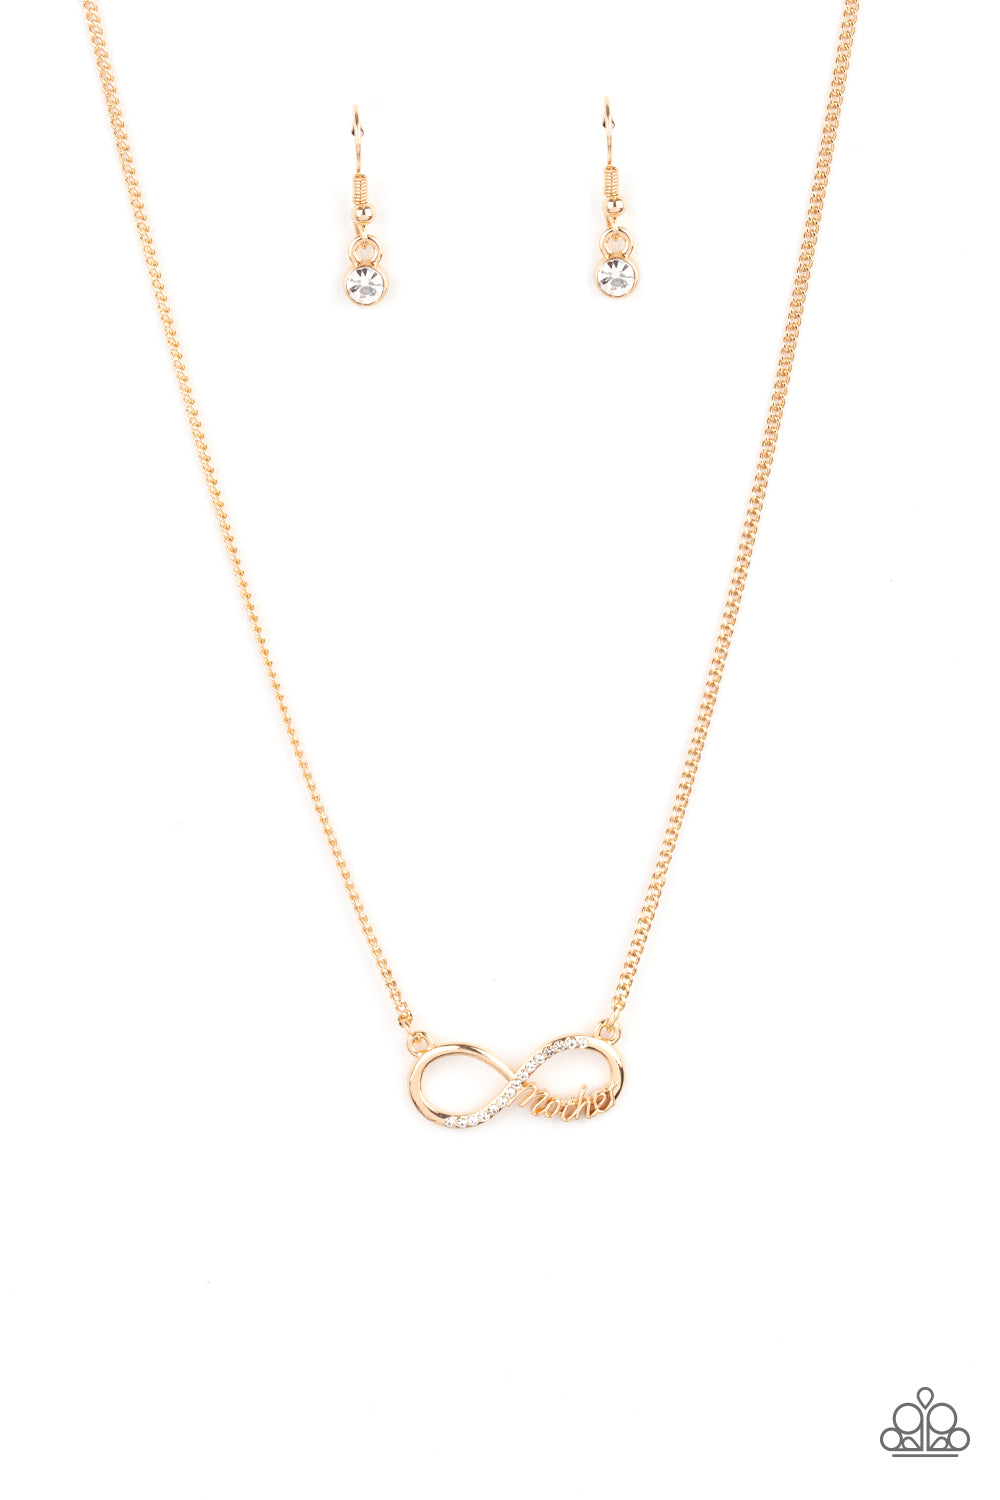 Forever Your Mom - Gold Infinity Necklaces a bright gold infinity symbol features the word "Mother" in filigree script across the bottom. A row of sparkly dainty rhinestones travels across the curve creating a lovingly charming sentiment as it connects to a dainty gold chain below the collar. Features an adjustable clasp closure.  Sold as one individual necklace. Includes one pair of matching earrings.